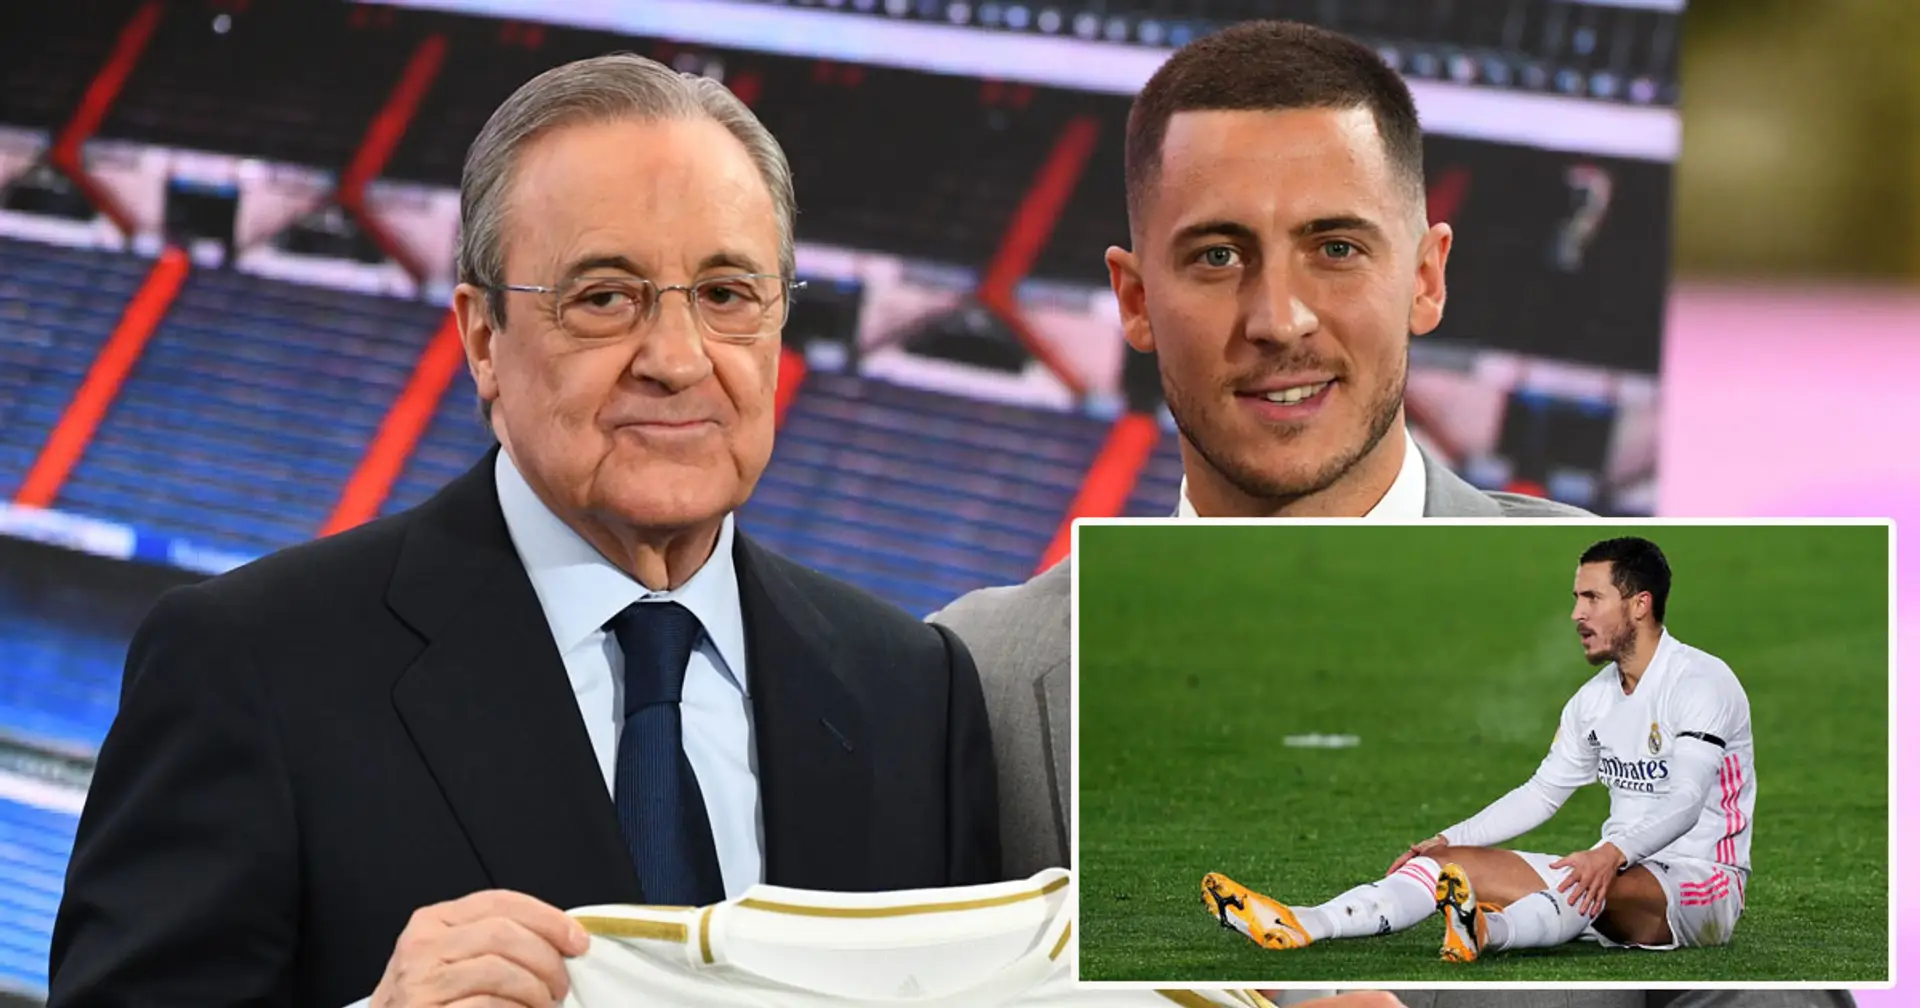 €100m or more? How much Real Madrid really paid for Eden Hazard - explained